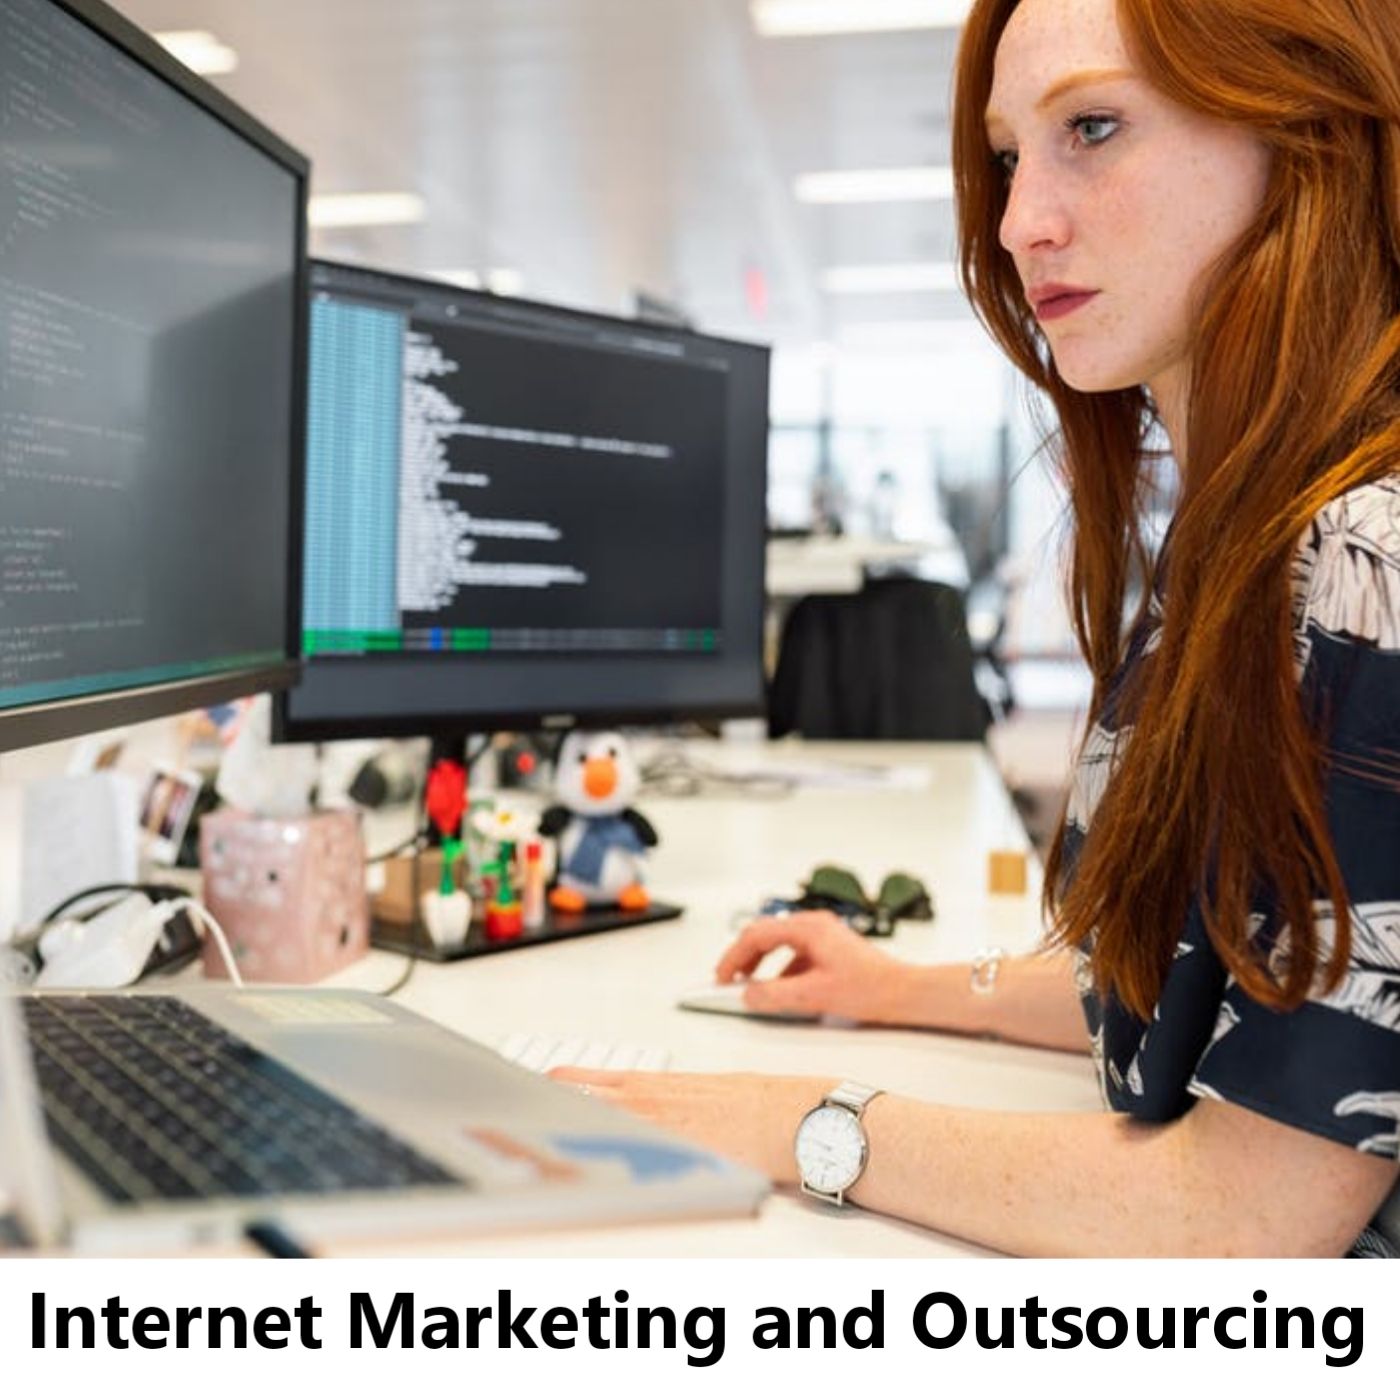 Internet Marketing and Outsourcing